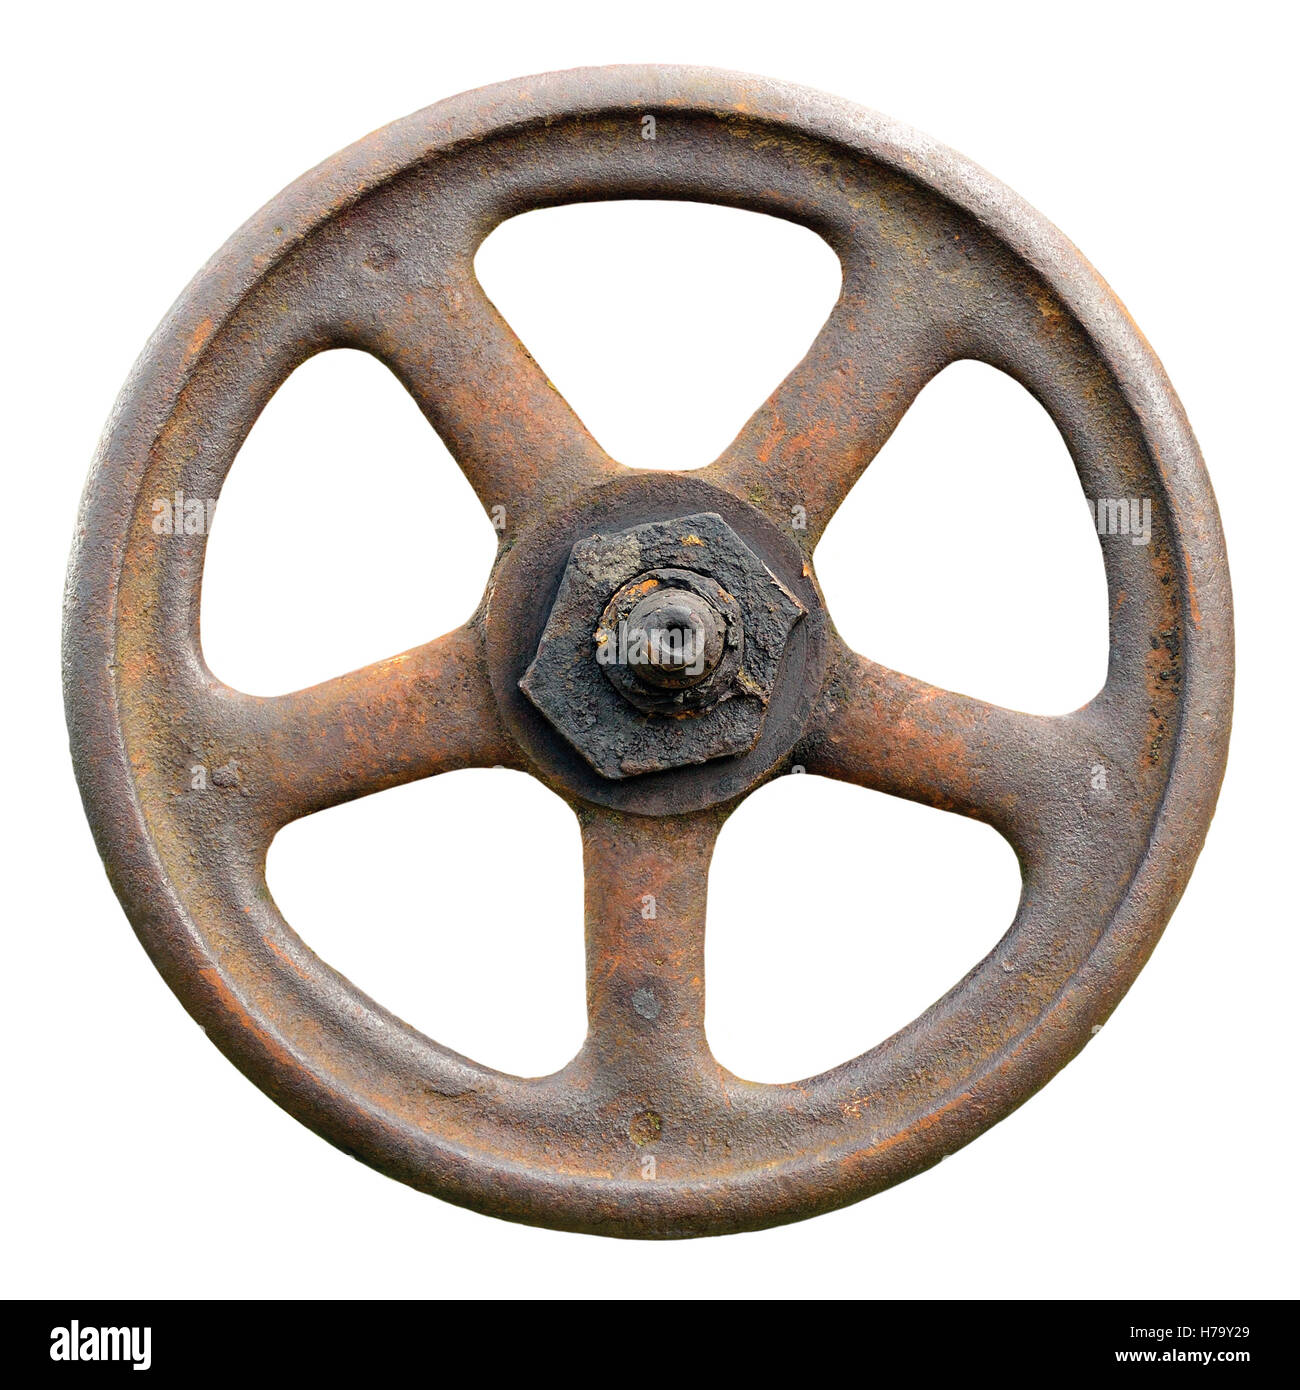 Industrial Valve Wheel And Rust Stem, Old Aged Weathered Rusty Grunge Latch Macro Closeup Isolated Stock Photo